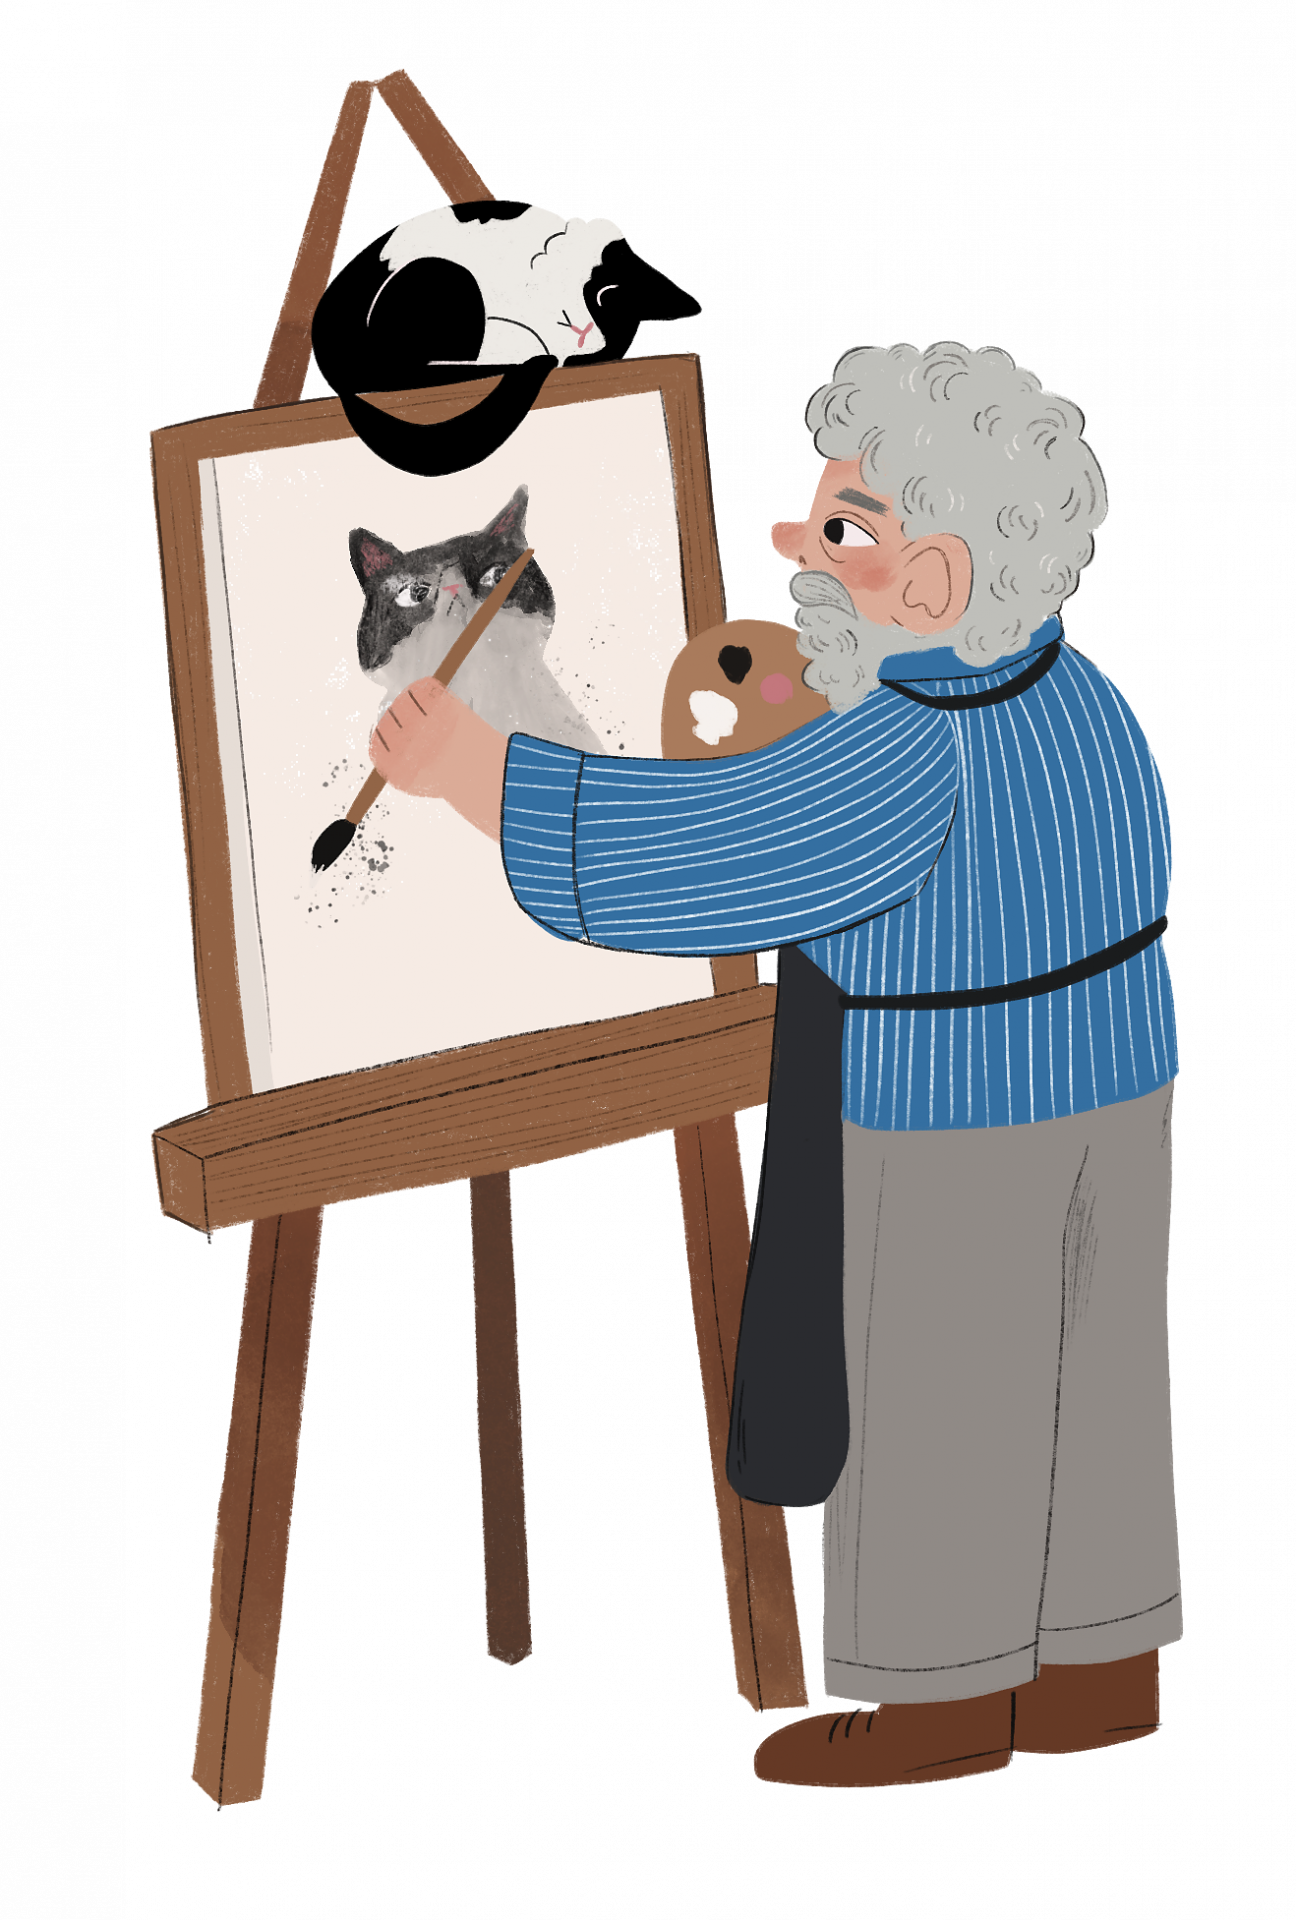 Illustration of a man with gray hair and beard painting a painting of a cat. 